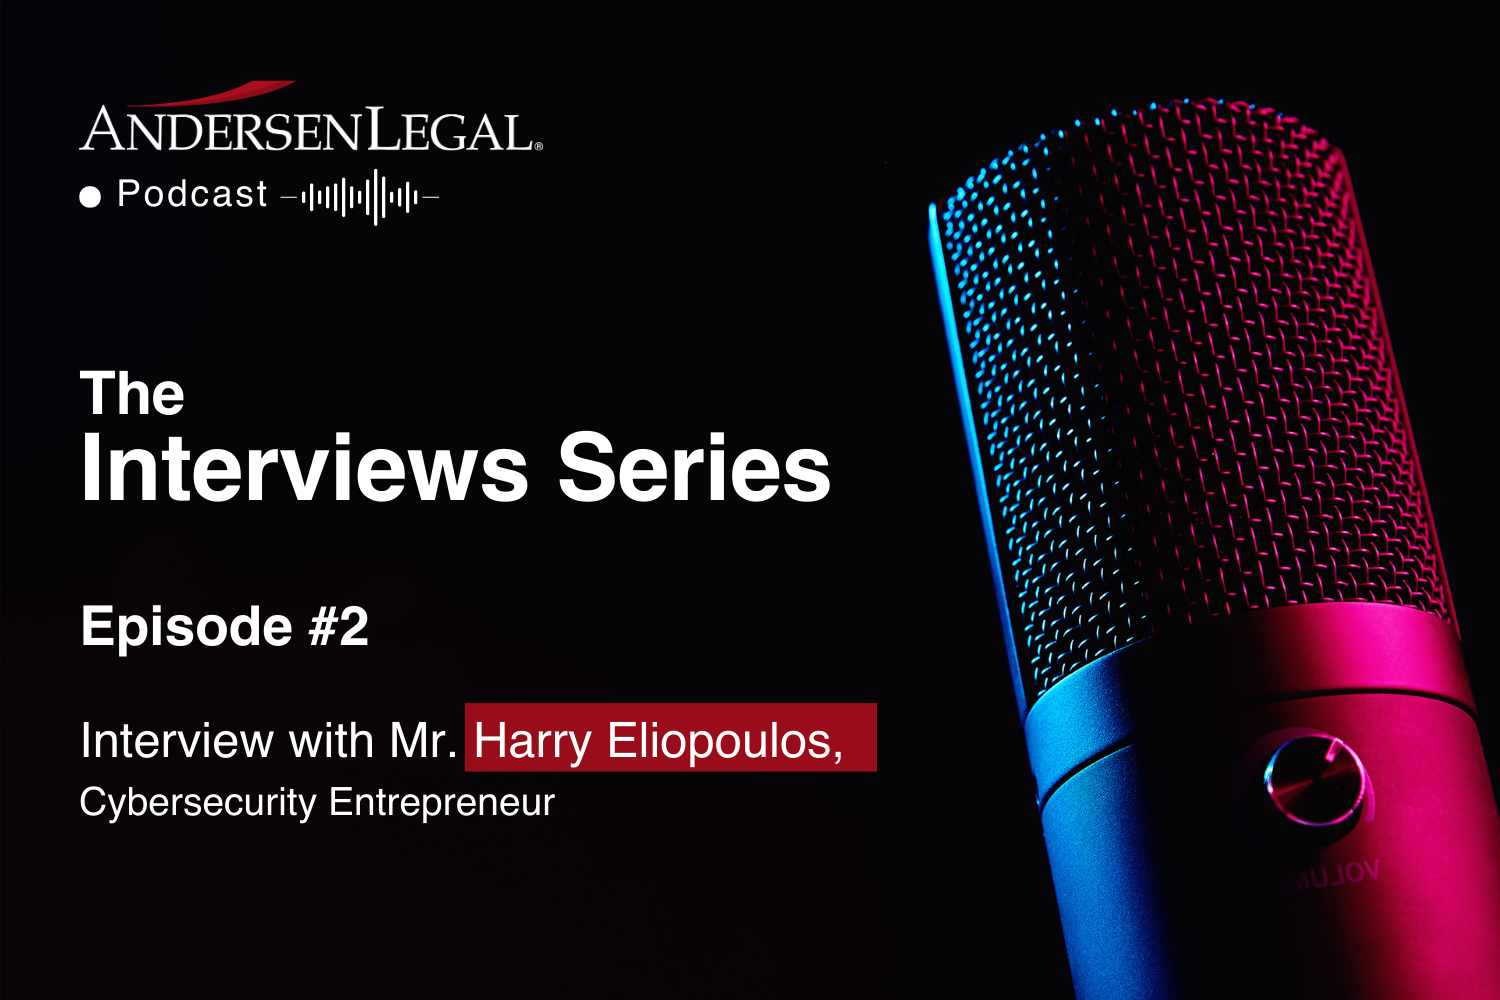 The Interviews Series: Mr. Harry Eliopoulos, Cybersecurity Entrepreneur